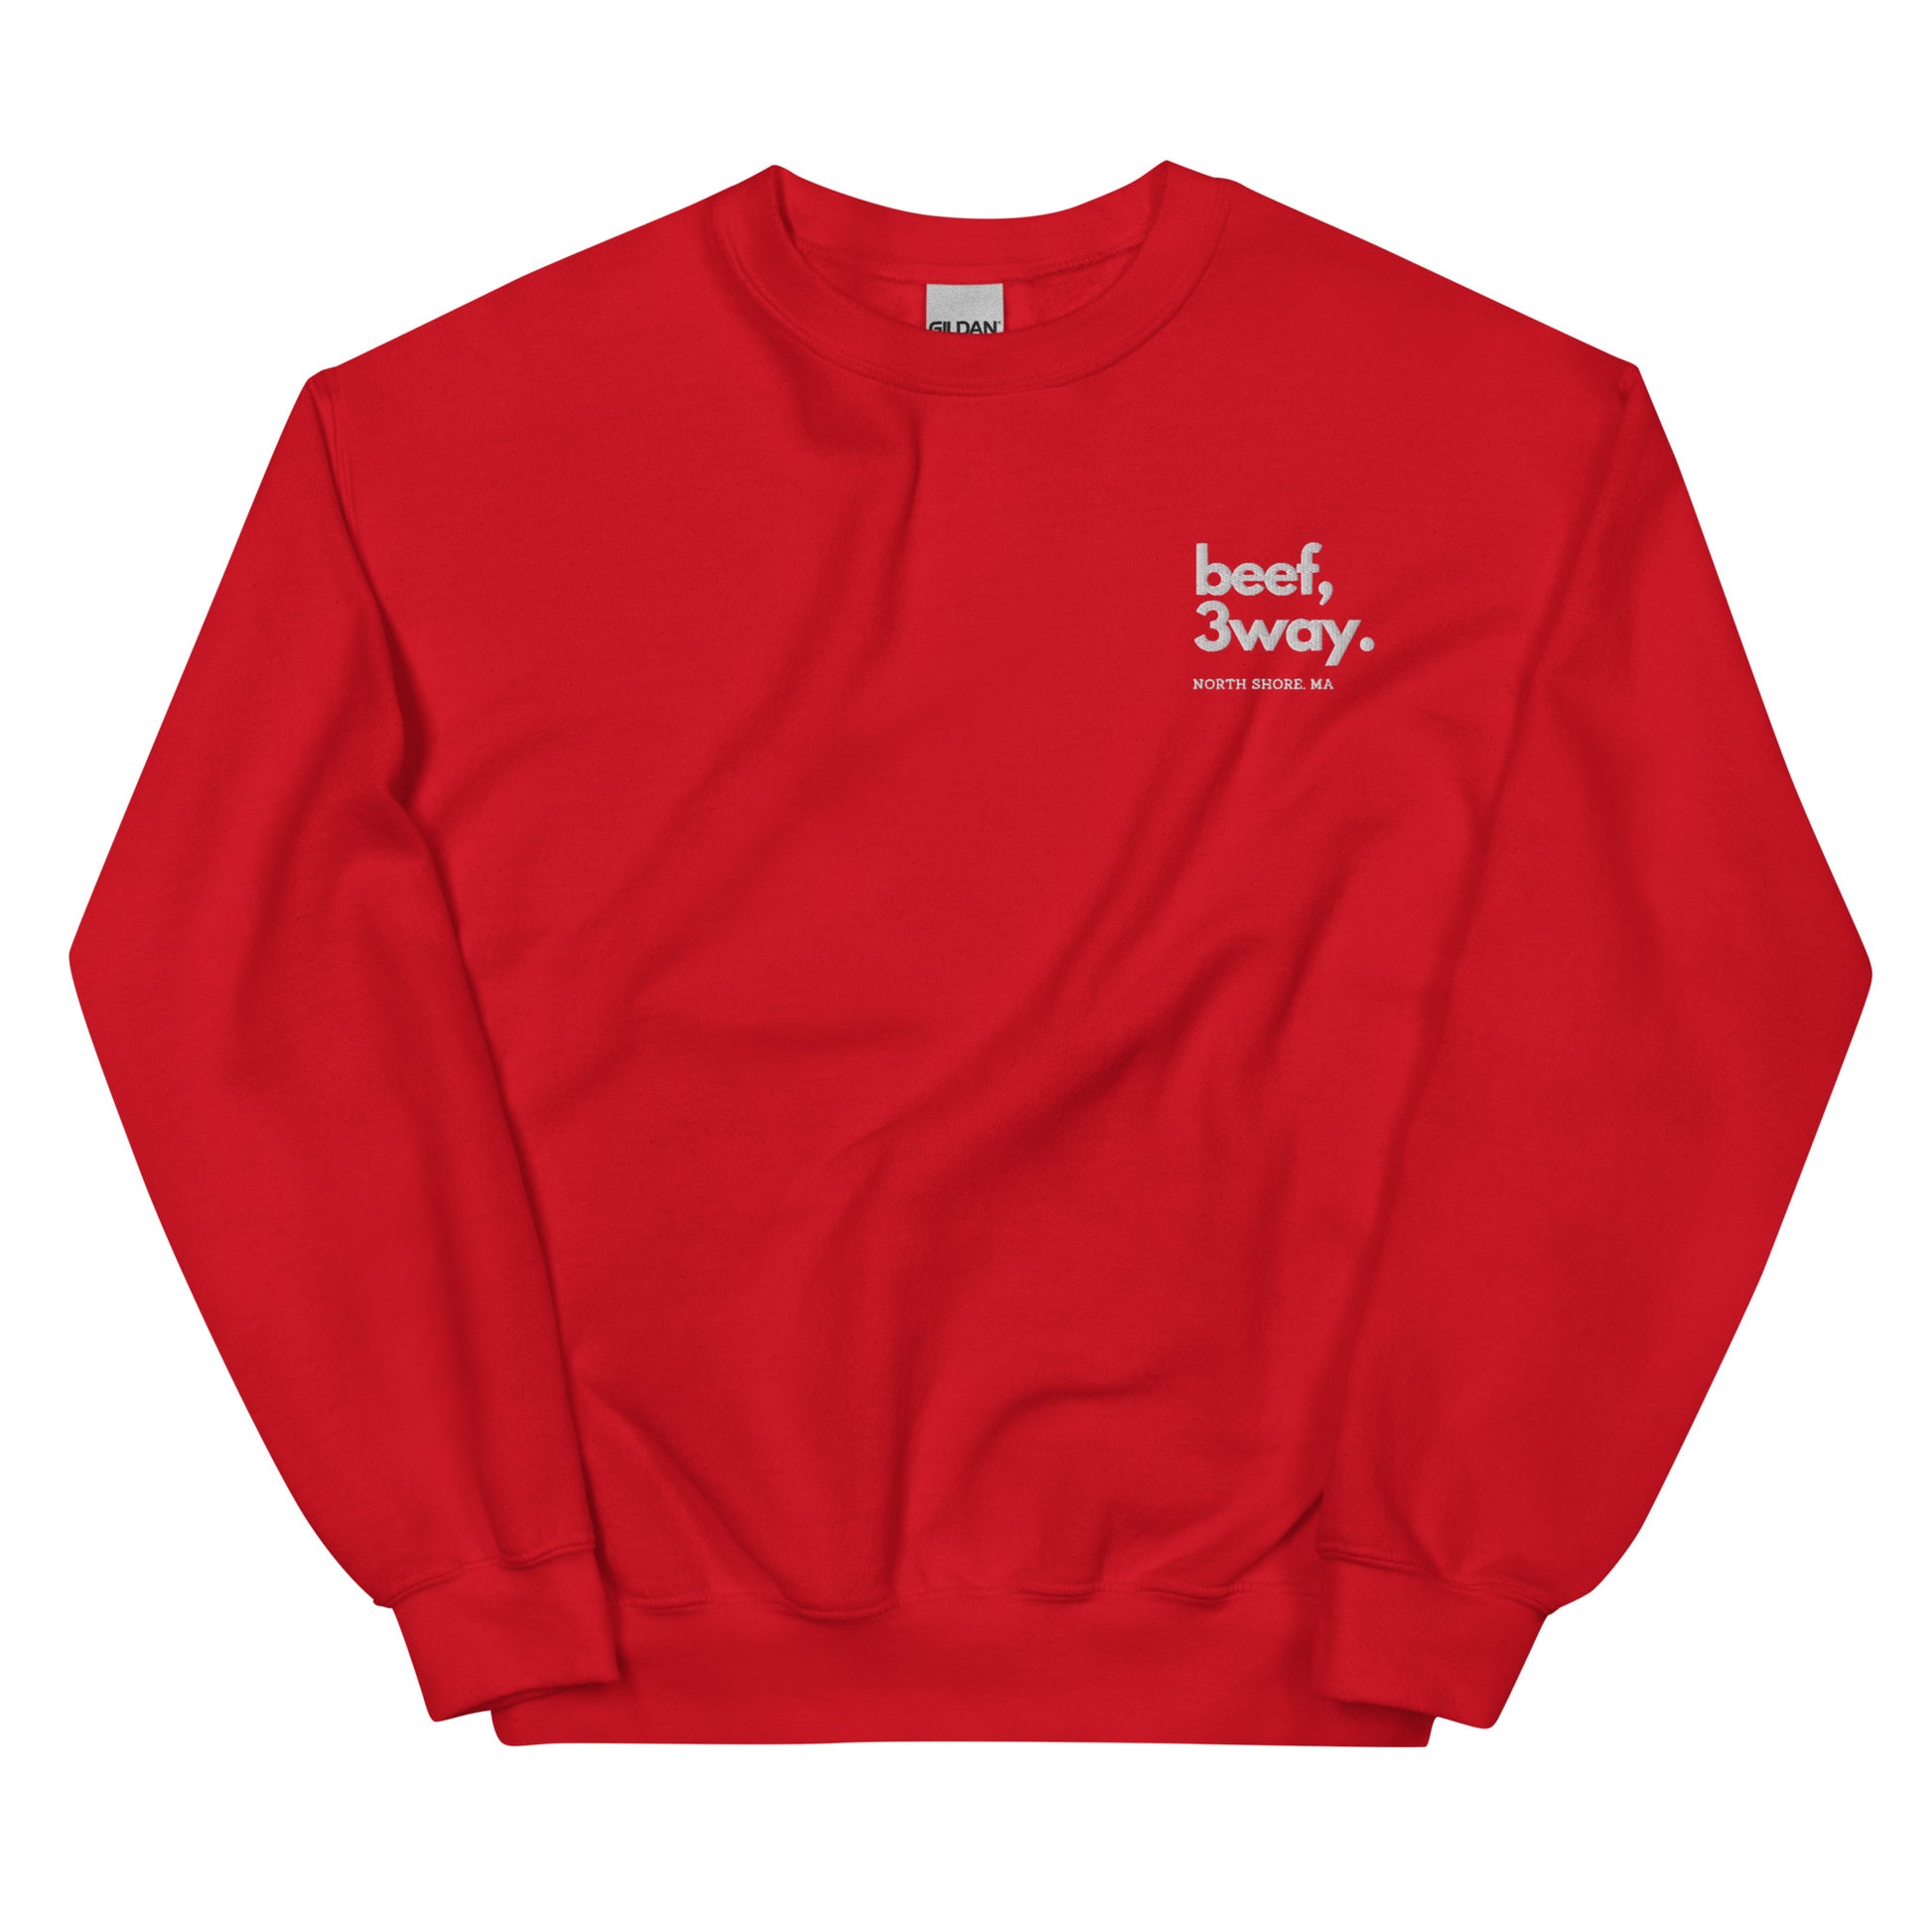 red crewneck that says "beef, 3way north shore ma" in white lettering